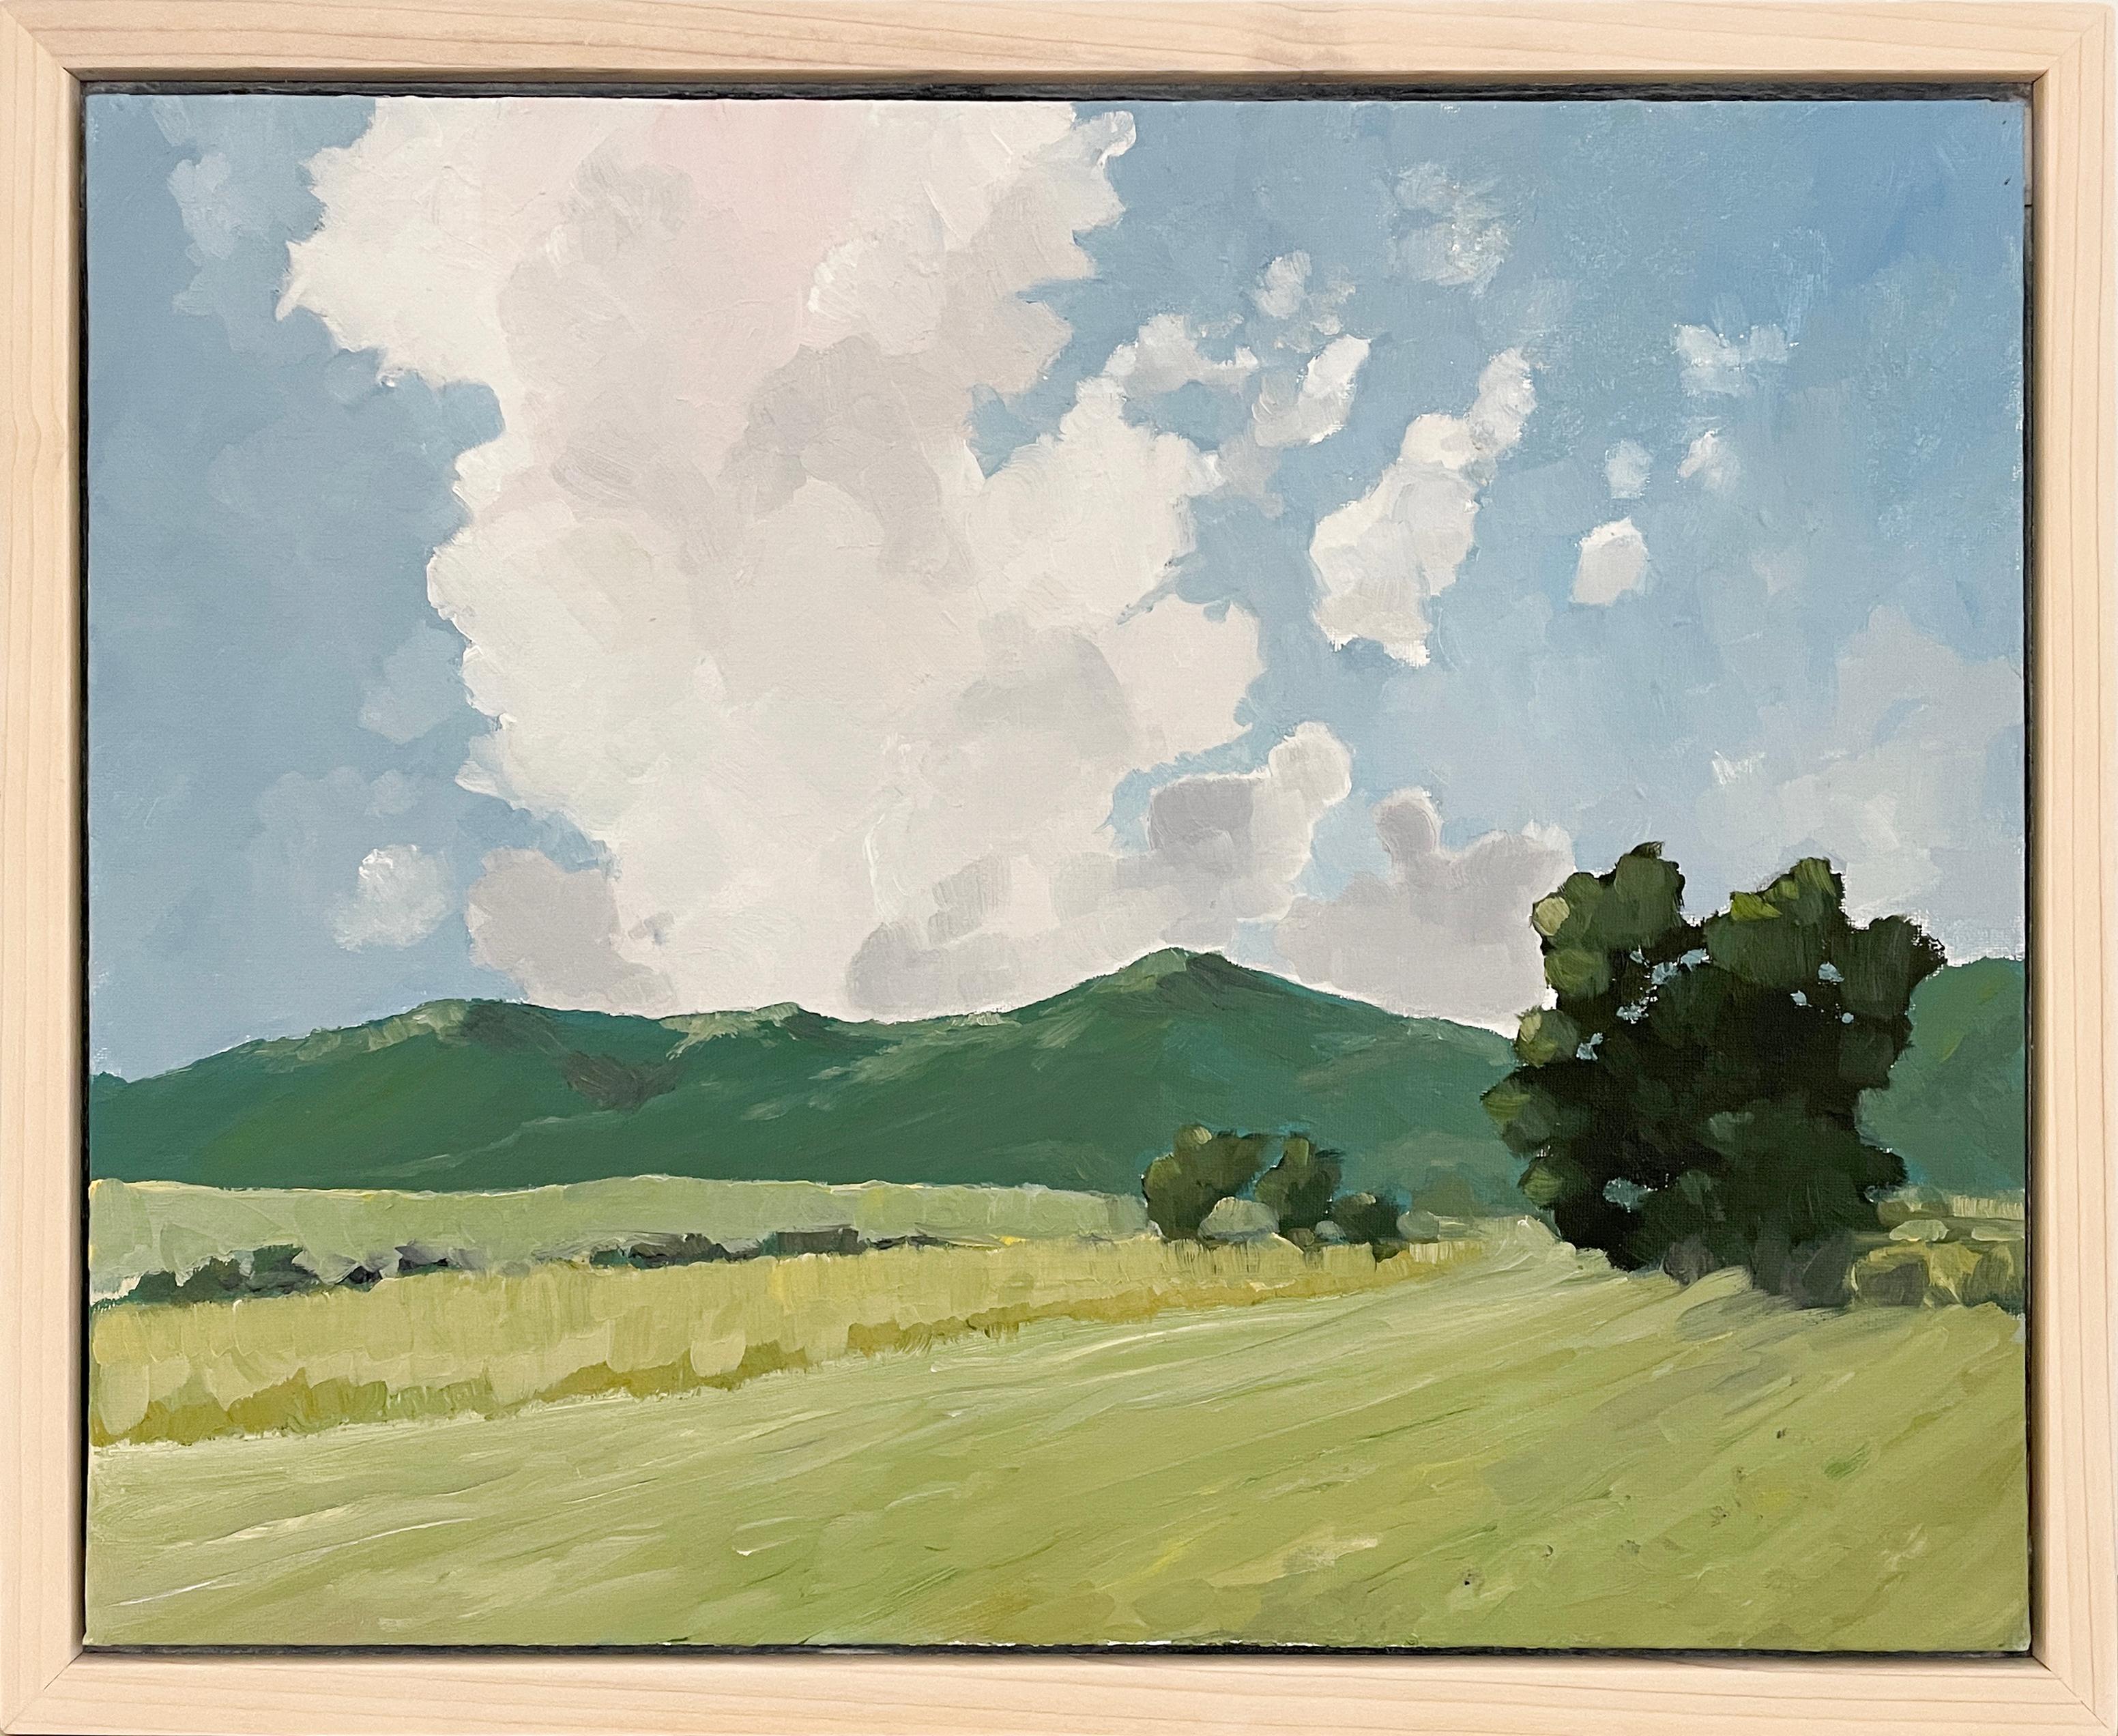 Modern en plein air landscape oil painting on canvas of countryside mountains and blue sky
'Midsummer' by Joseph Rapp
16 x 20 inches, acrylic on canvas
17.75 x 21.75 inches framed in white stained wood floater frame

Joseph Rapp’s craftsmanship is